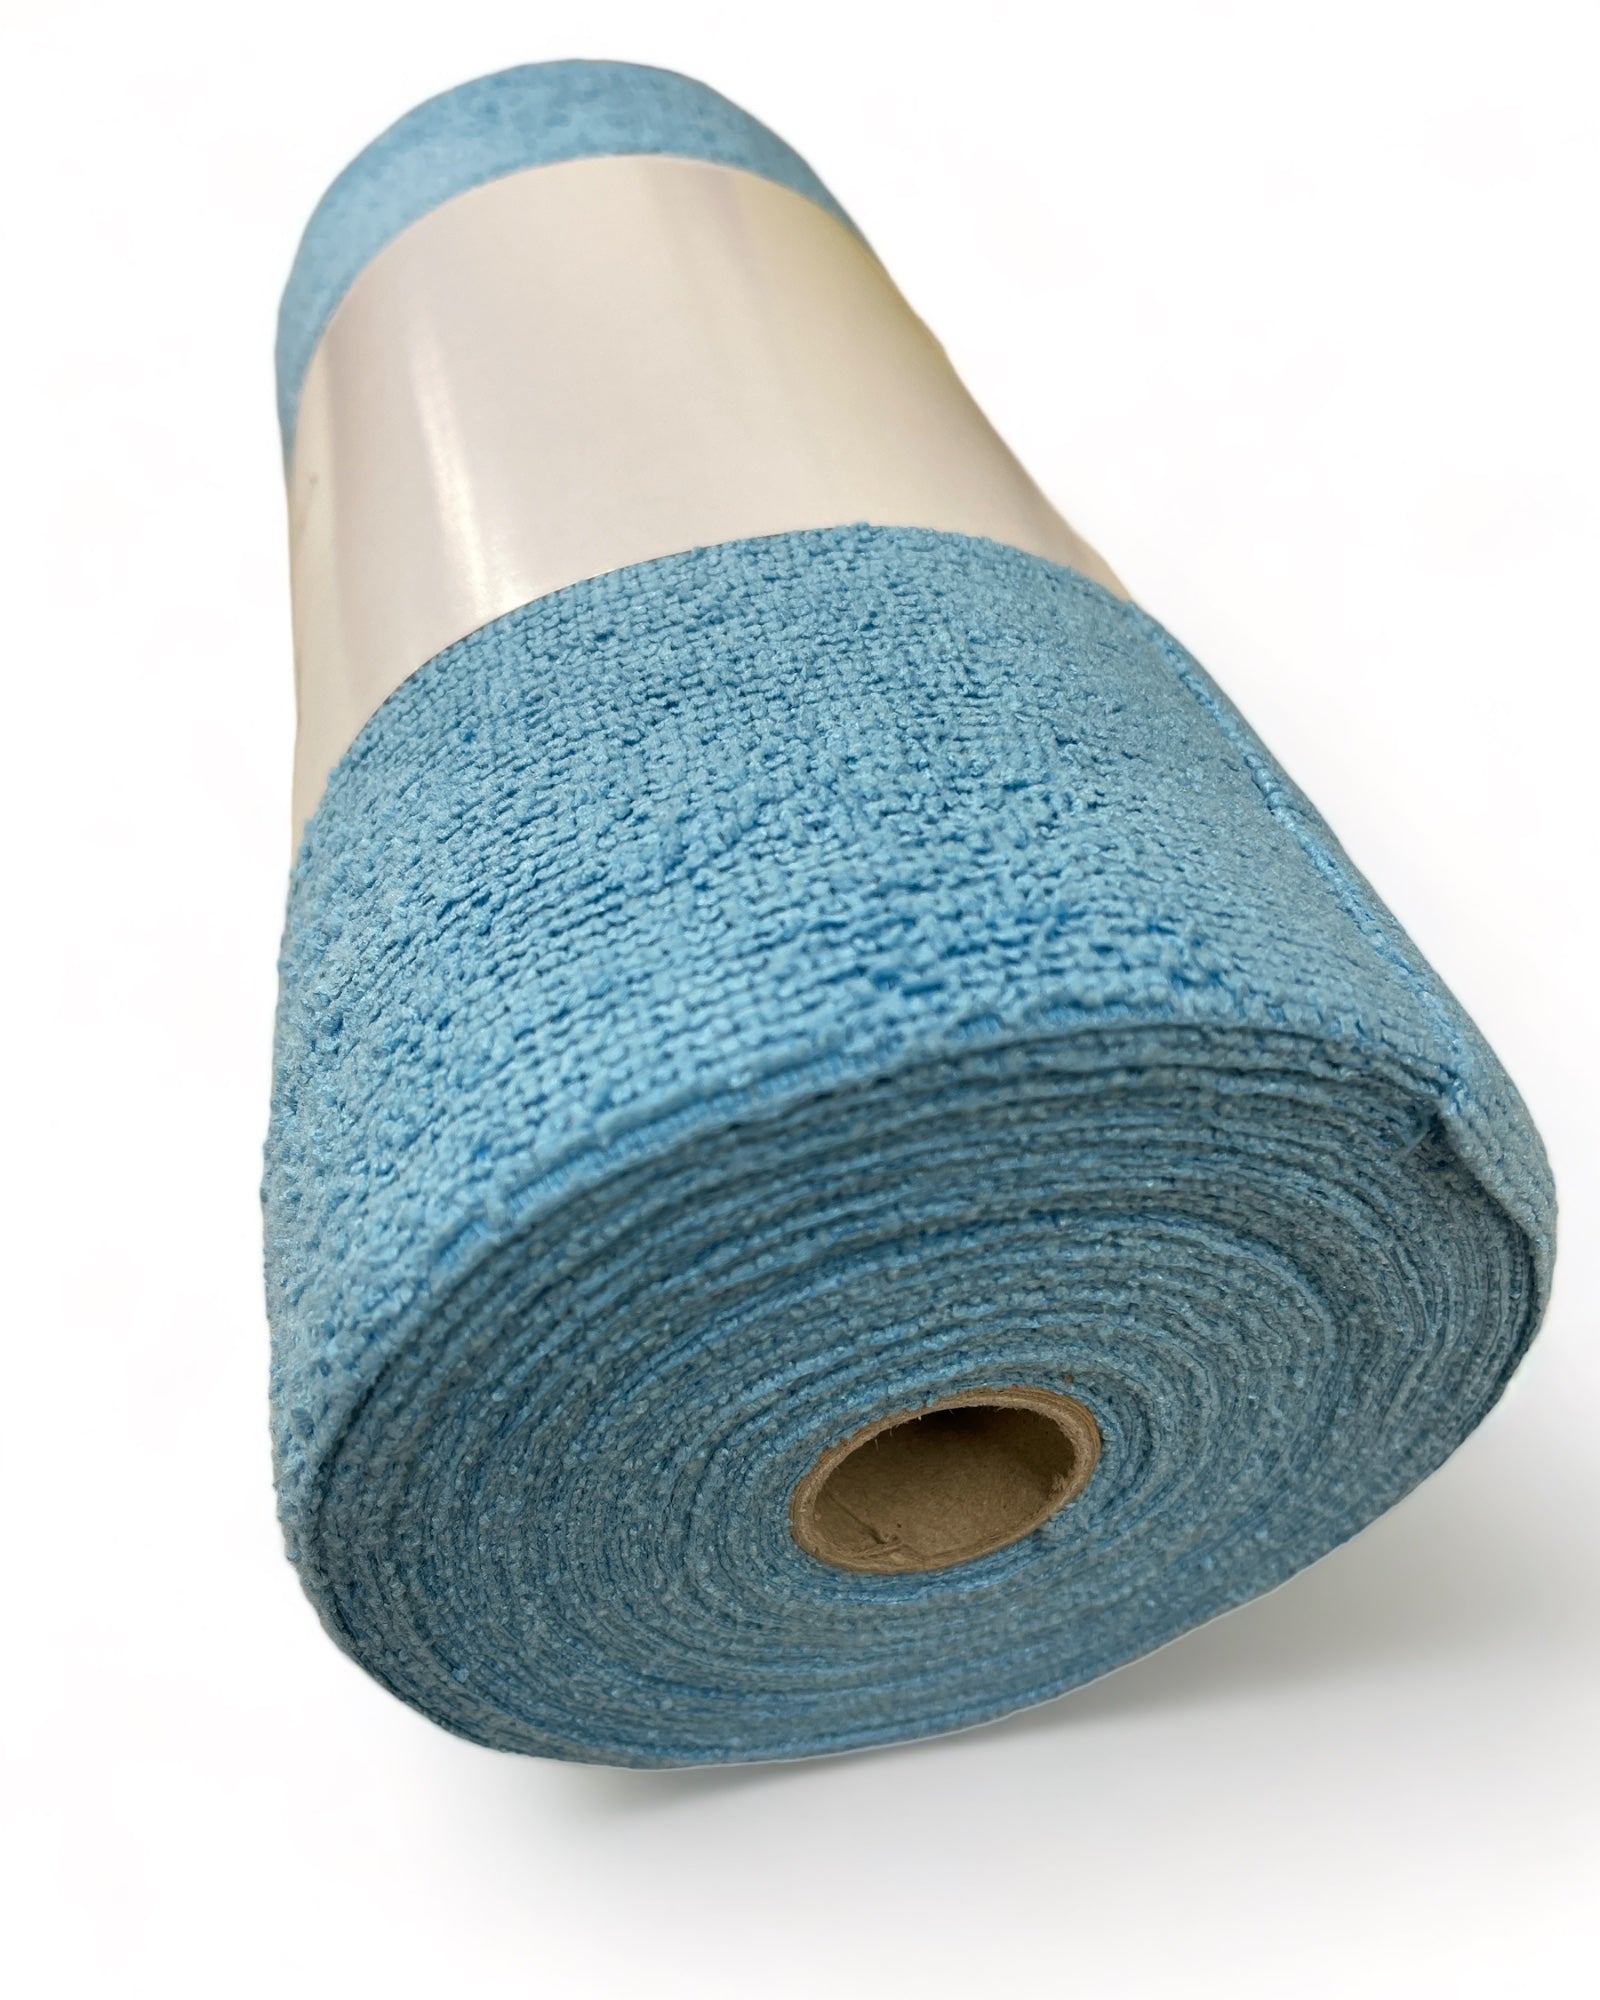 Microfiber Rolls: Cost Effective Disposable Cleaning Cloths